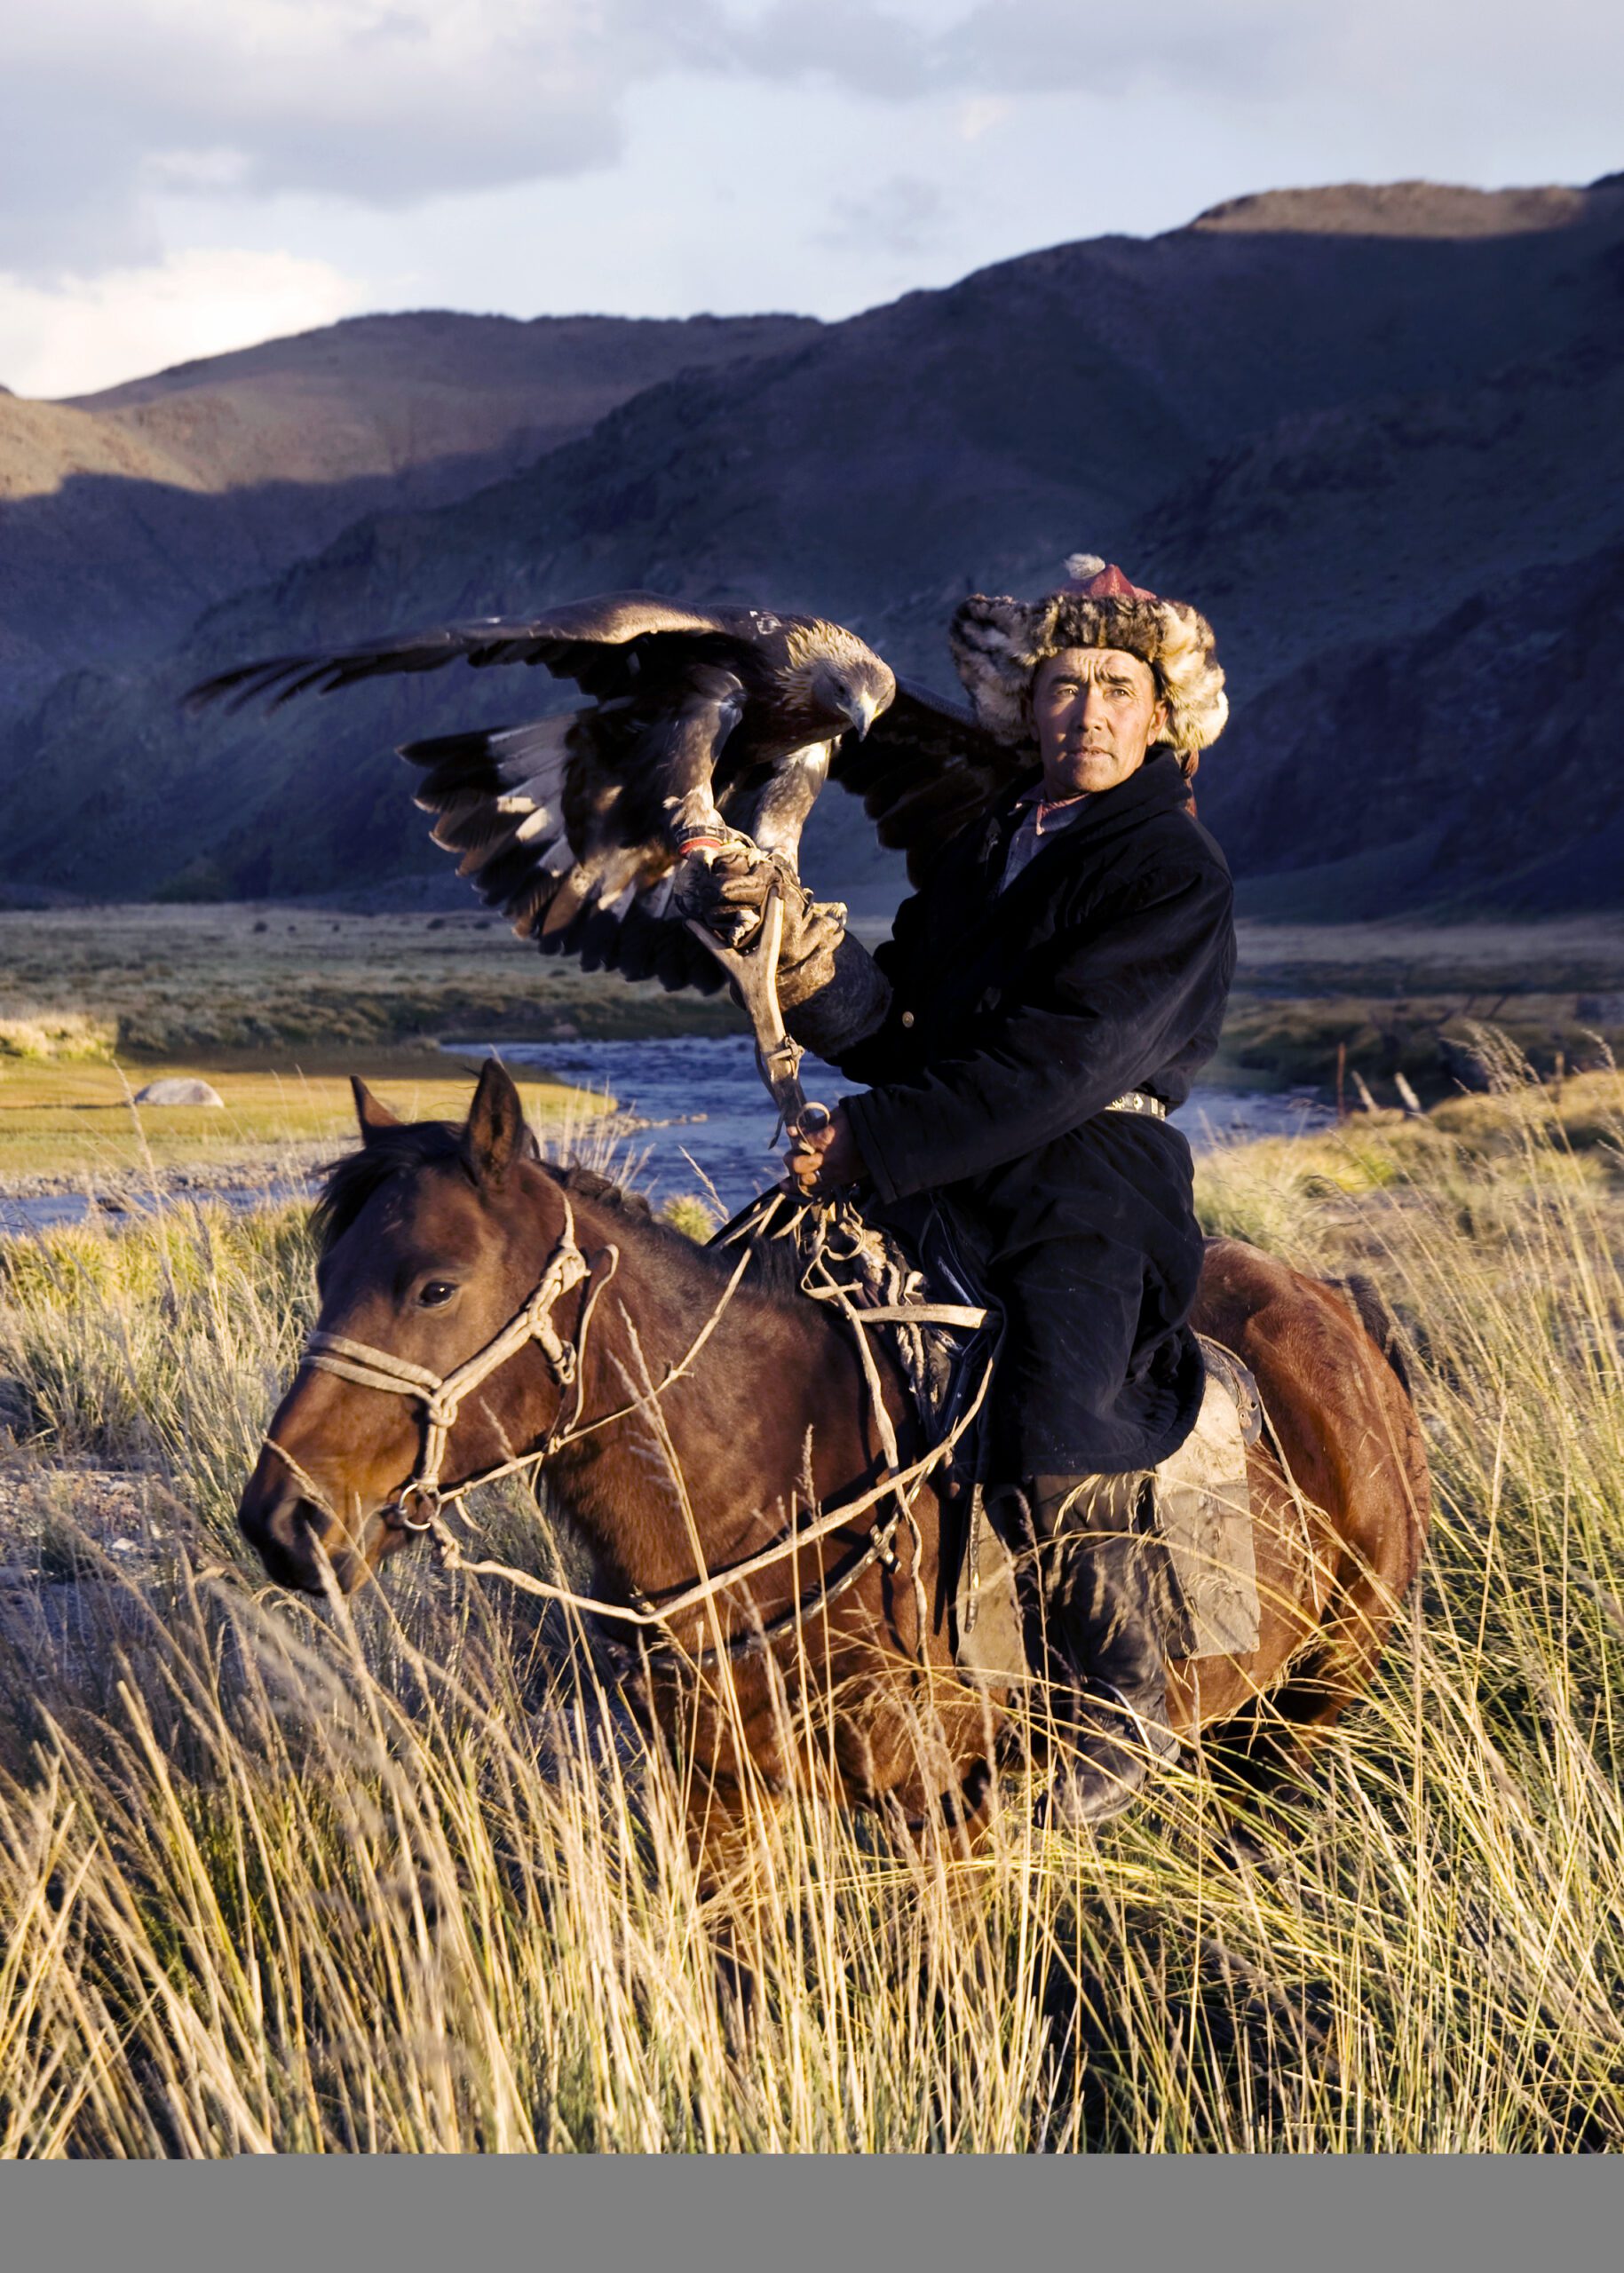 kazakh-men-traditionally-hunt-foxes-wolves-using-trained-golden-eagles-olgei-western-mongolia